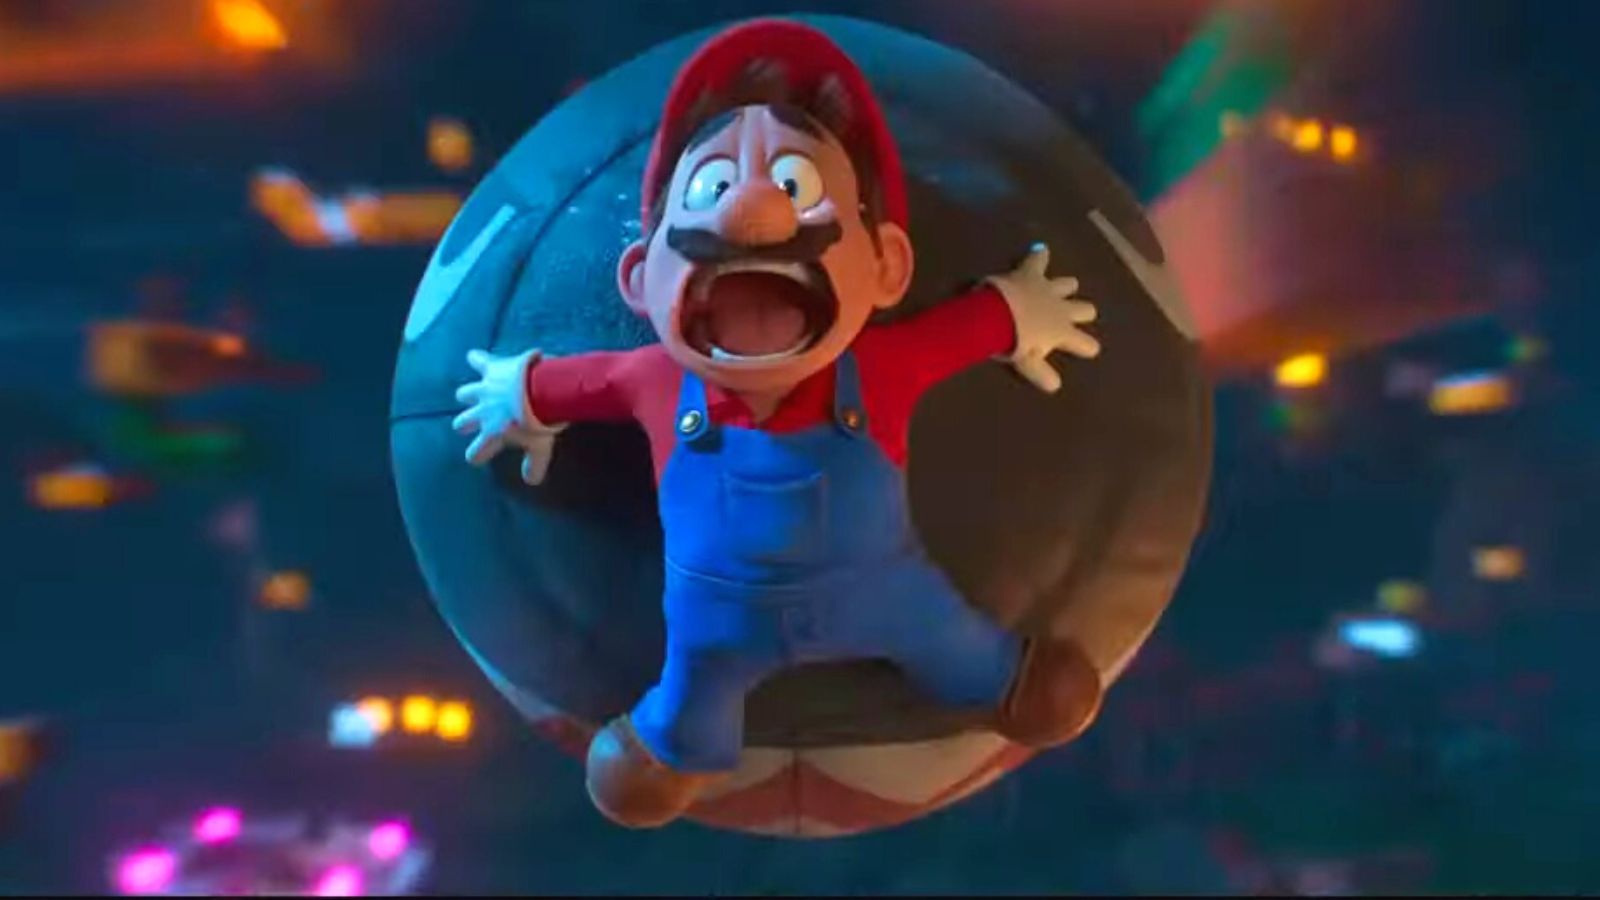 Chris Pratt isn’t the only voice receiving complaints after new ‘Super Mario Bros. Movie’ trailer